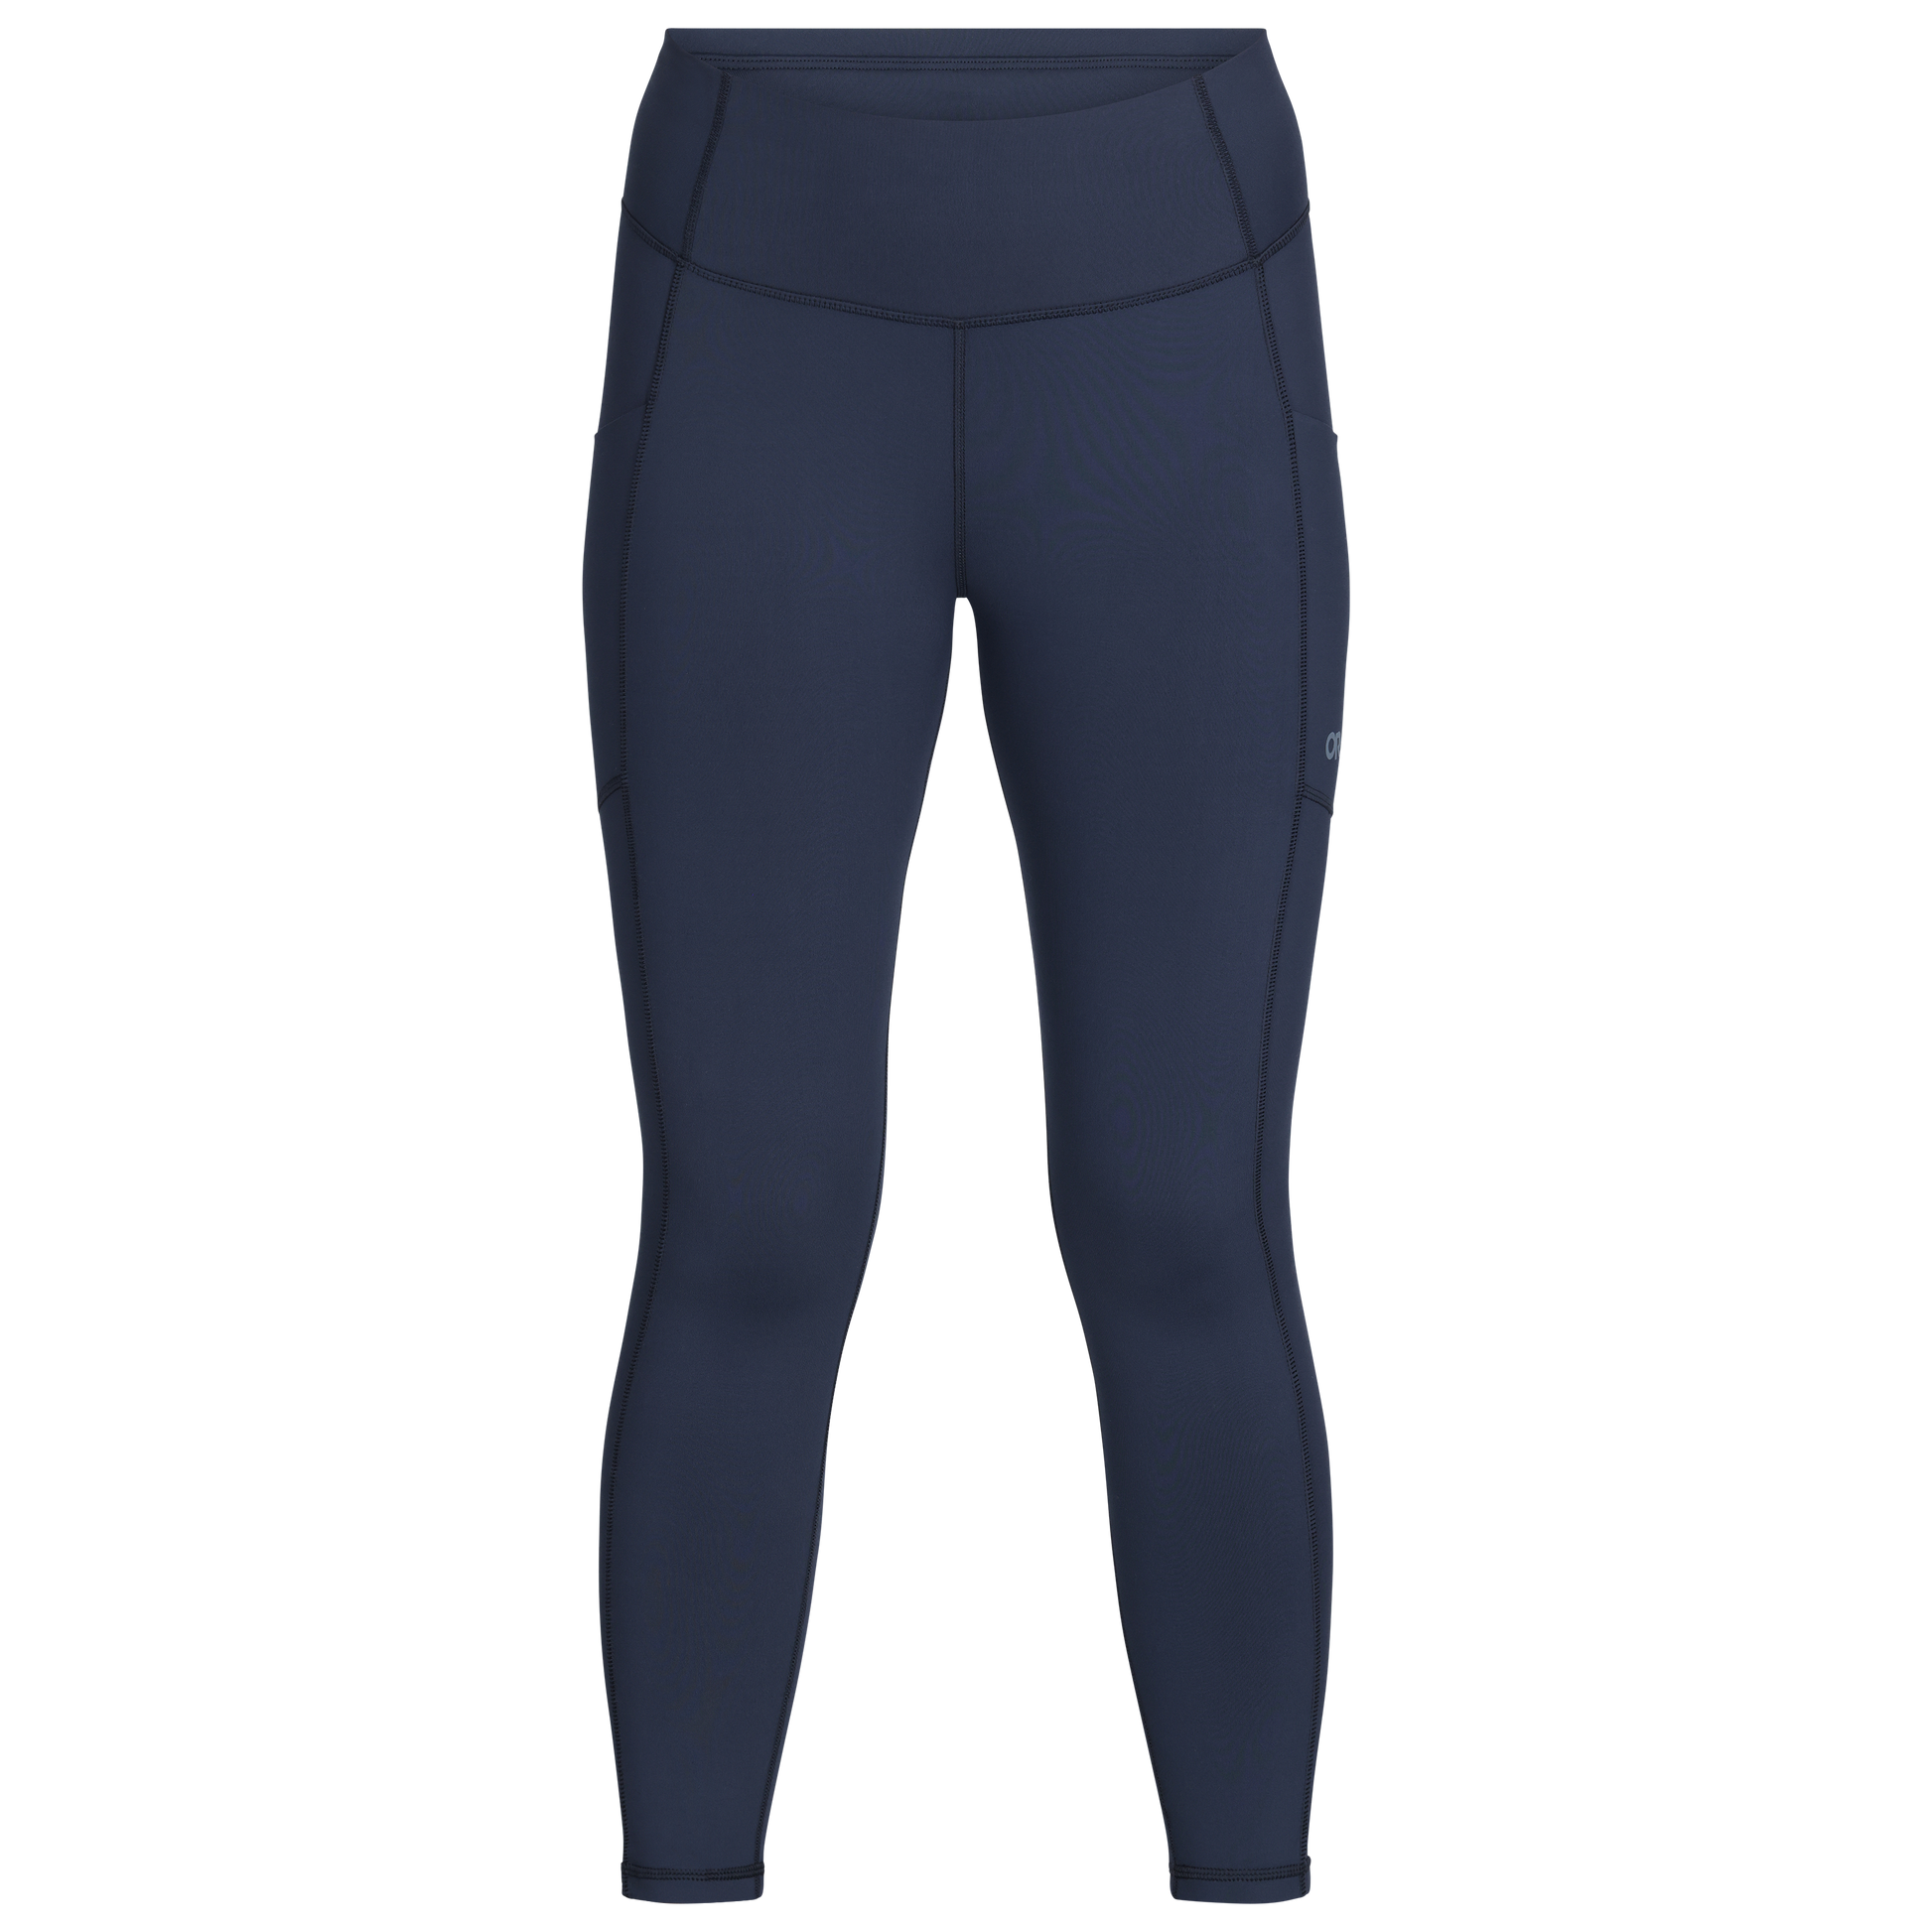 Outdoor Research Ferrosi Hybrid Legging - Women's - Al's Sporting Goods:  Your One-Stop Shop for Outdoor Sports Gear & Apparel